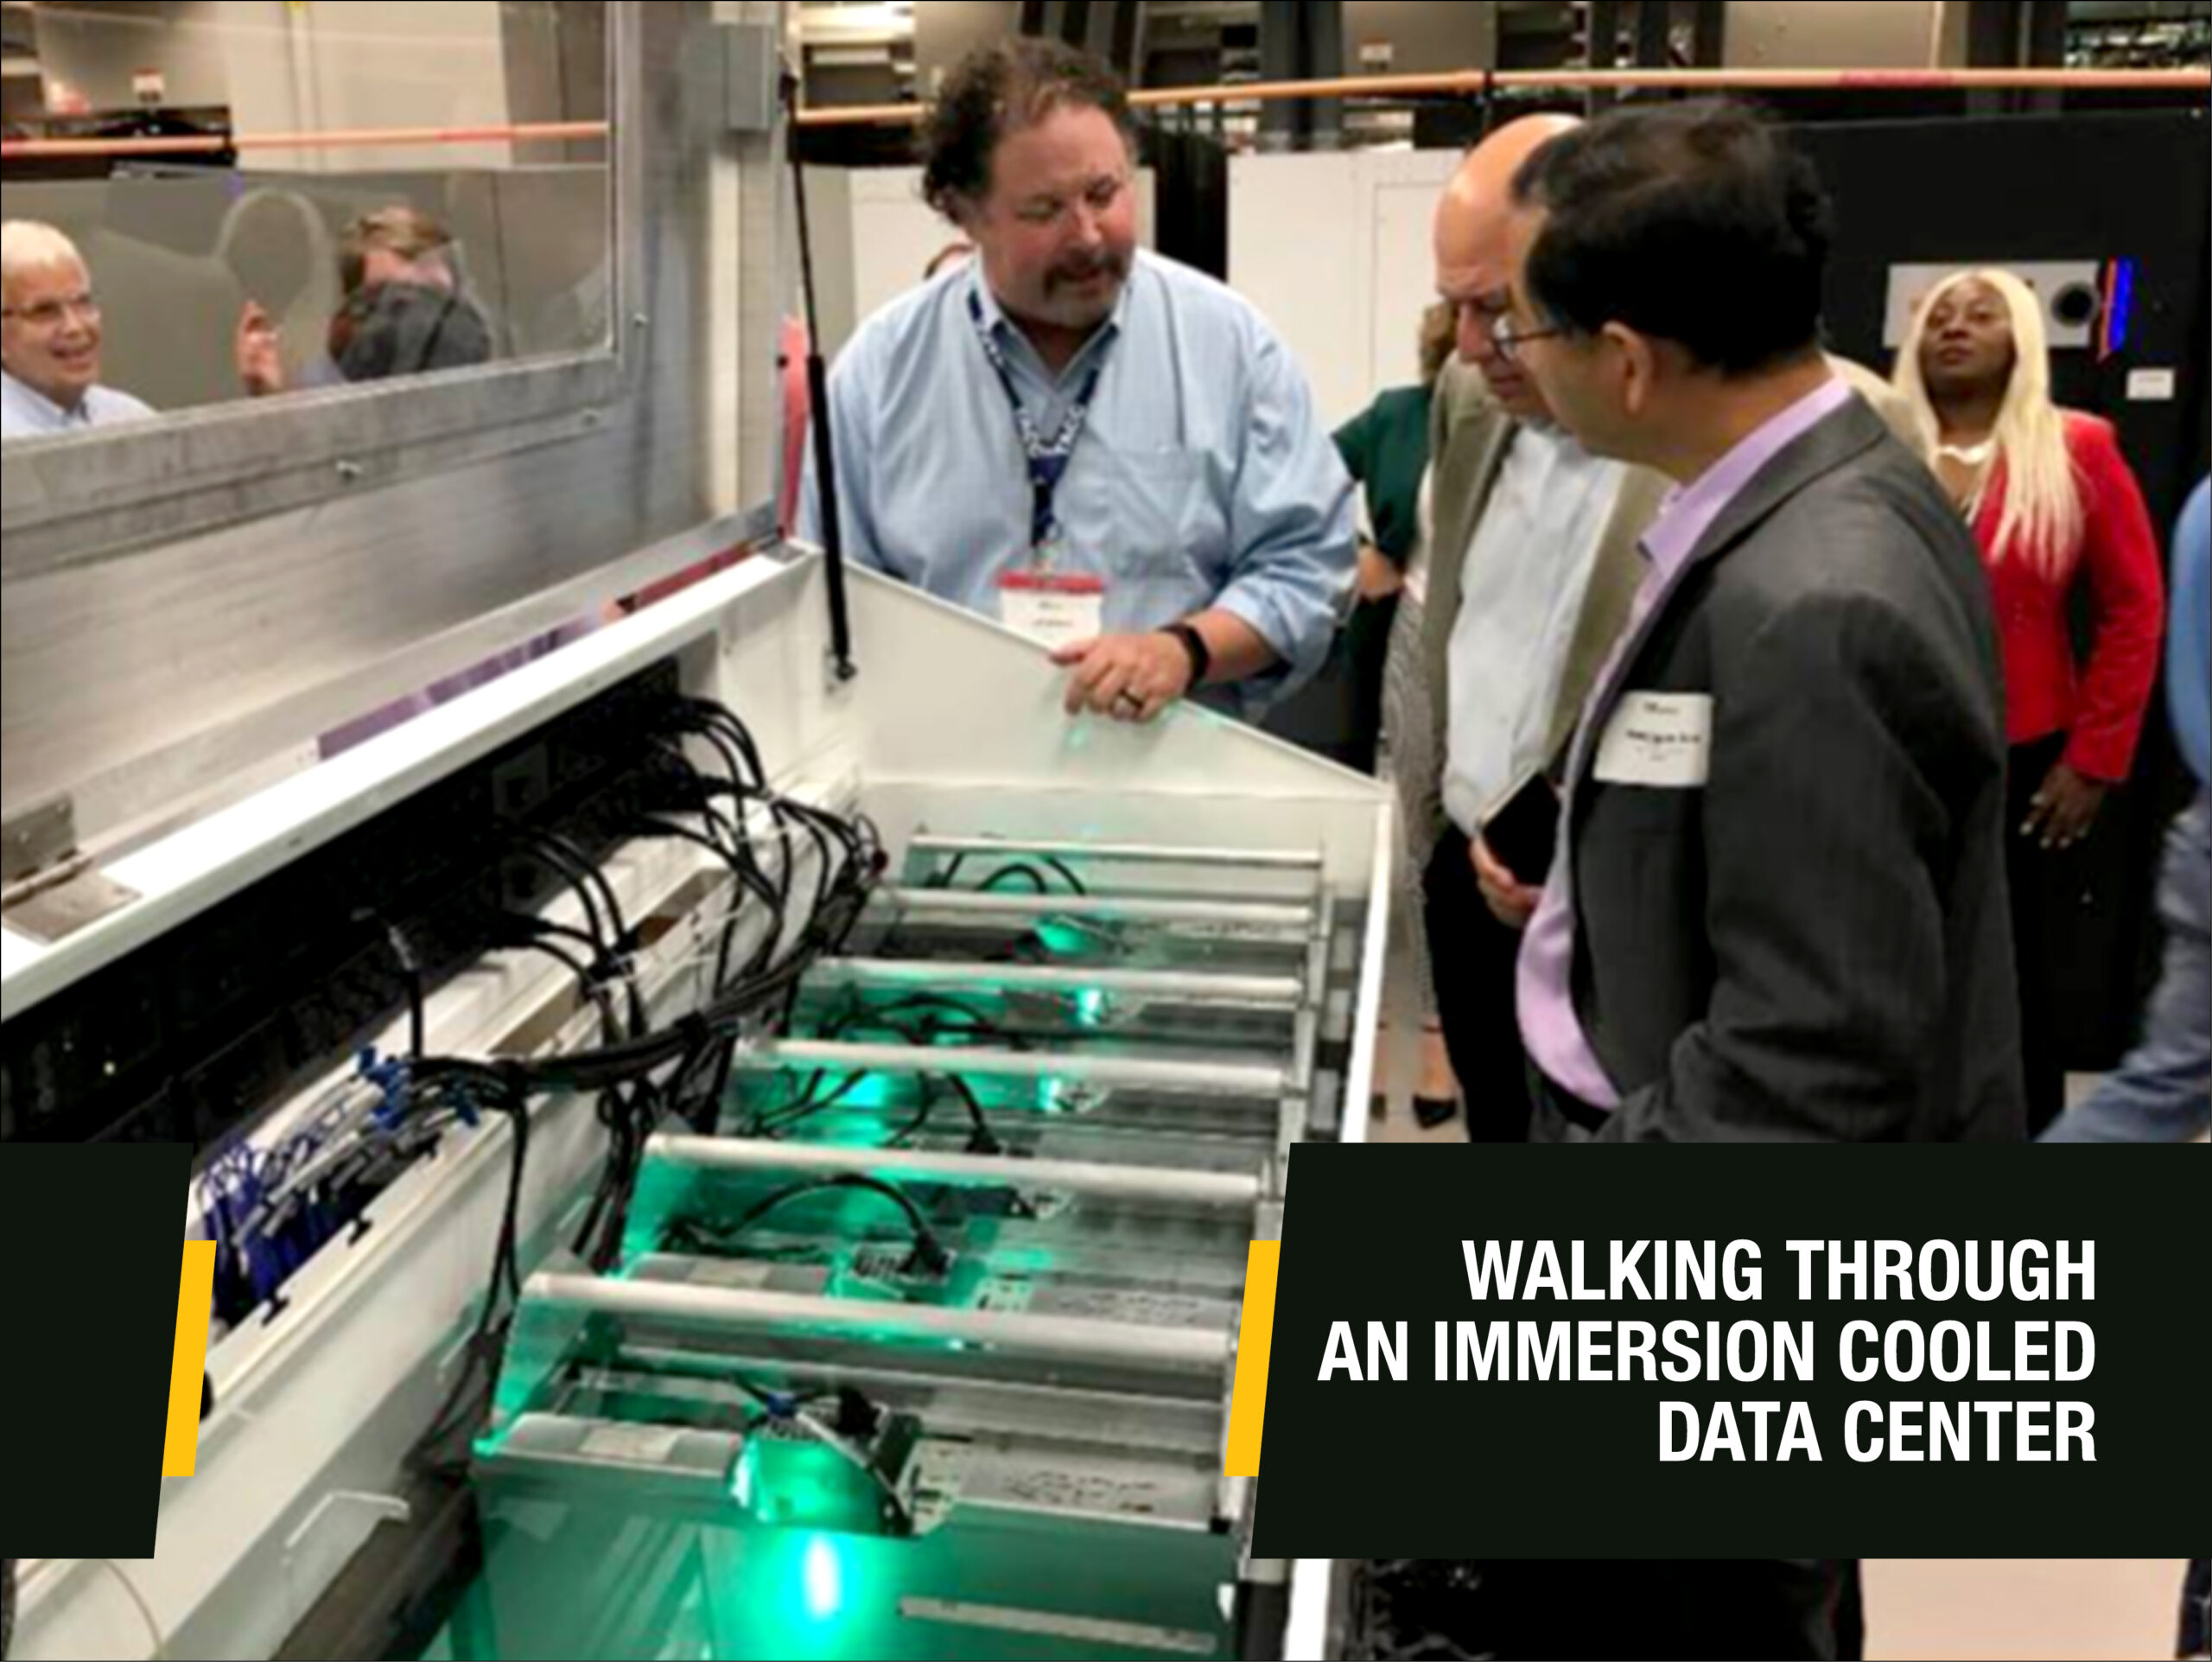 Walking through an Immersion Cooled Data Center